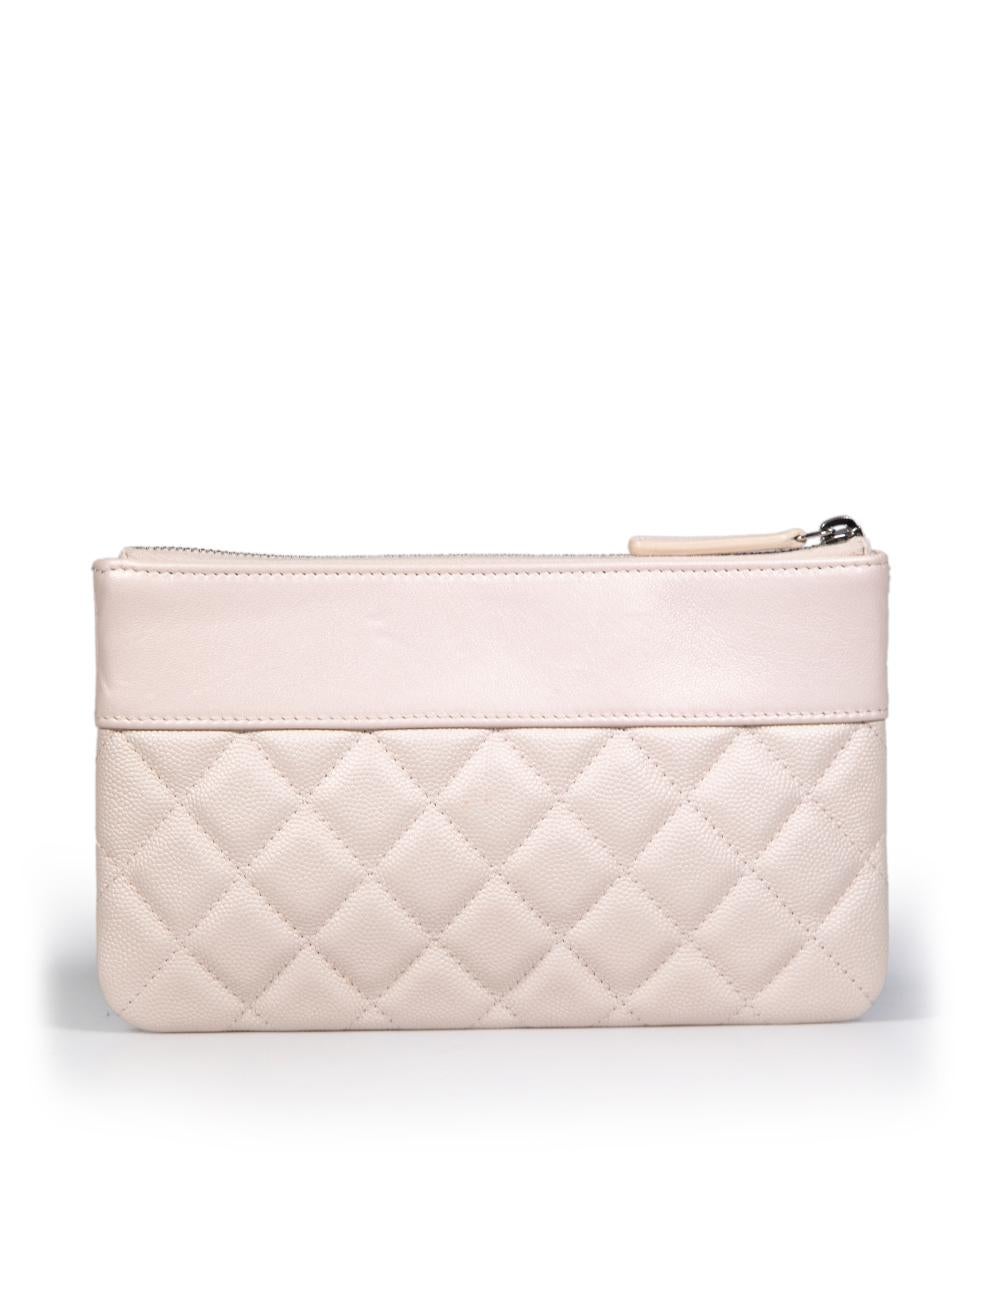 Chanel 2020 Pink Caviar Leather Interlocking CC Quilted Zip Clutch In Excellent Condition For Sale In London, GB